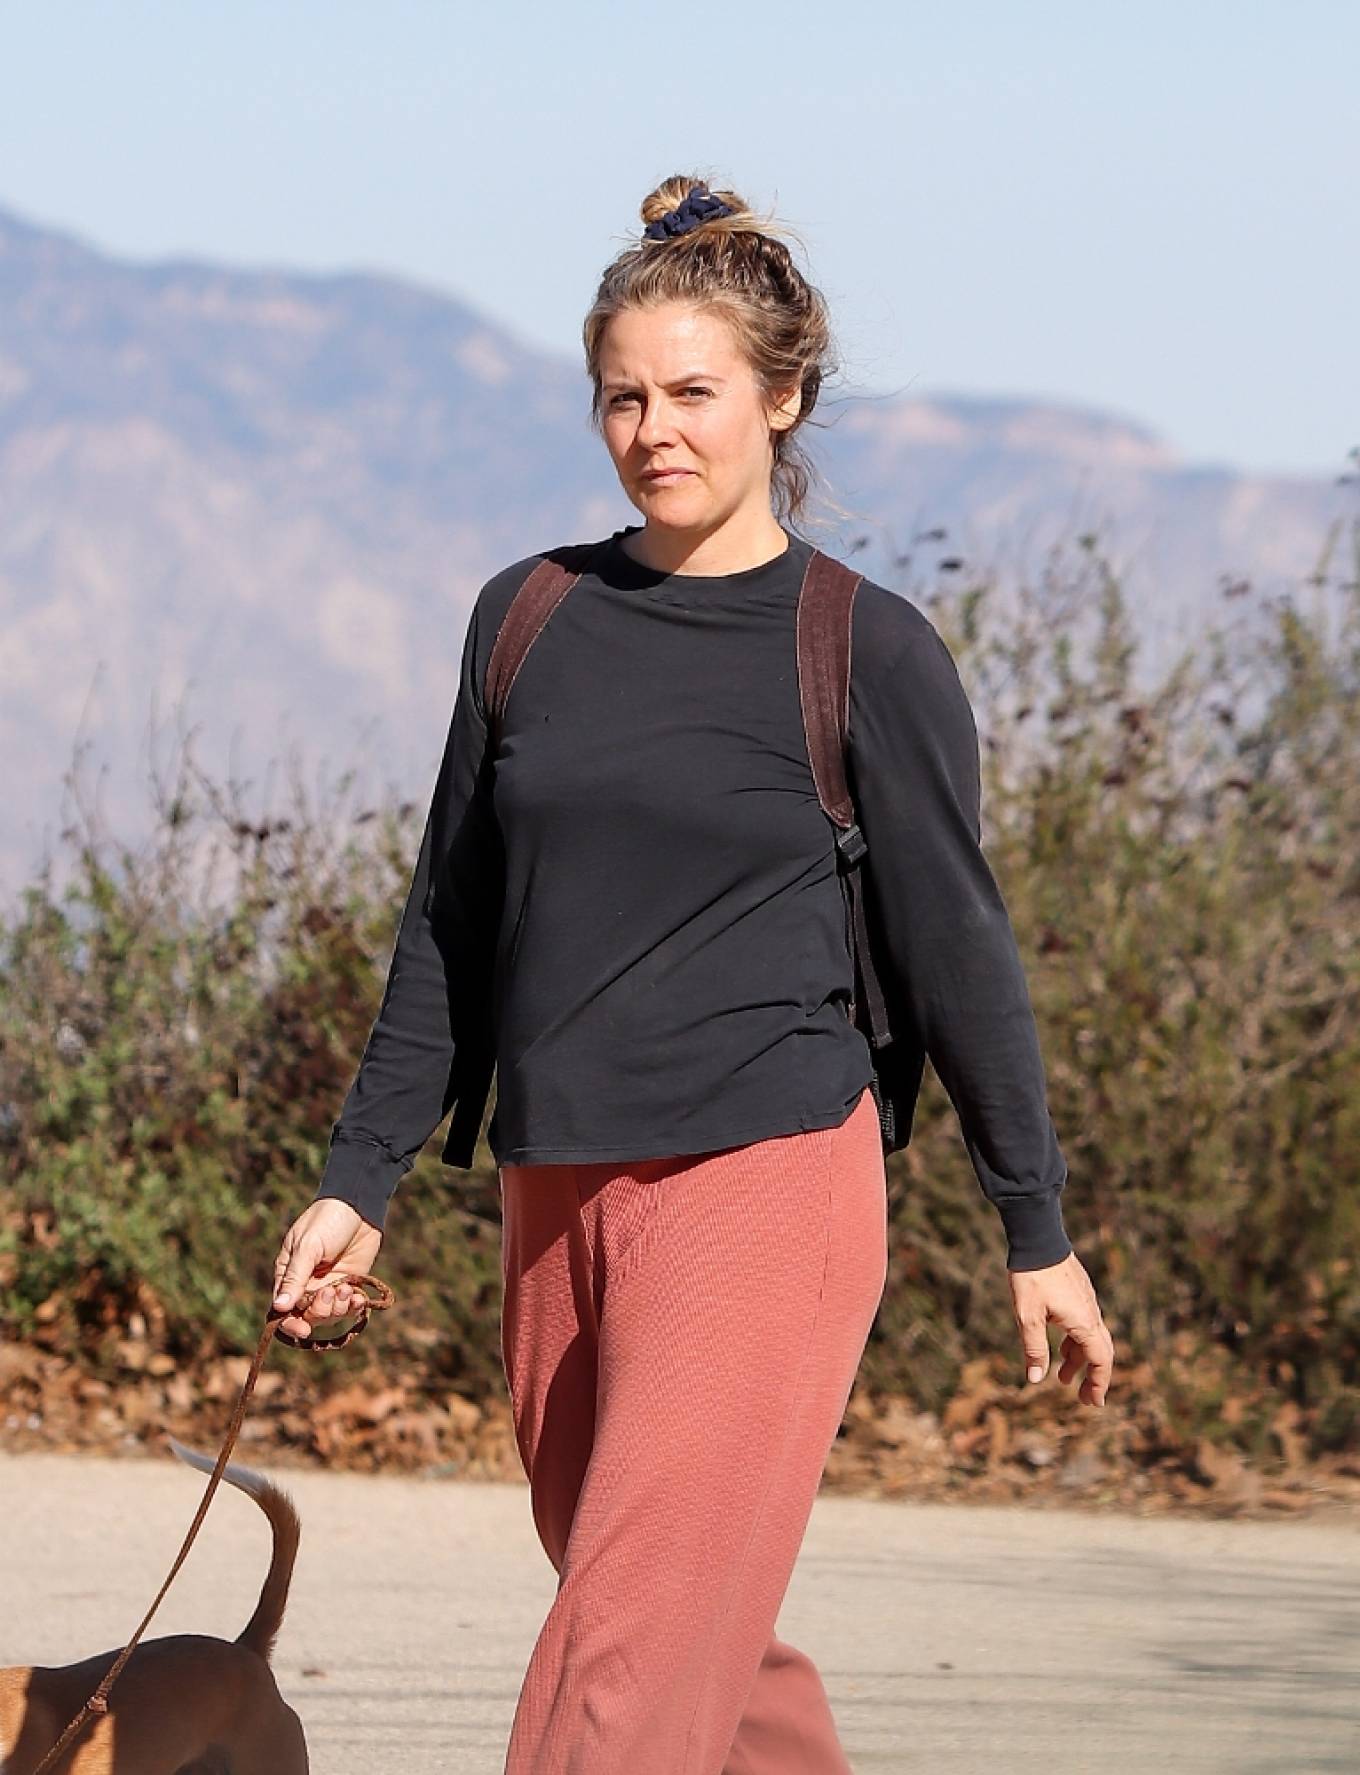 Alicia Silverstone 2021 : Alicia Silverstone – Seen while takes her dog for a walk-03